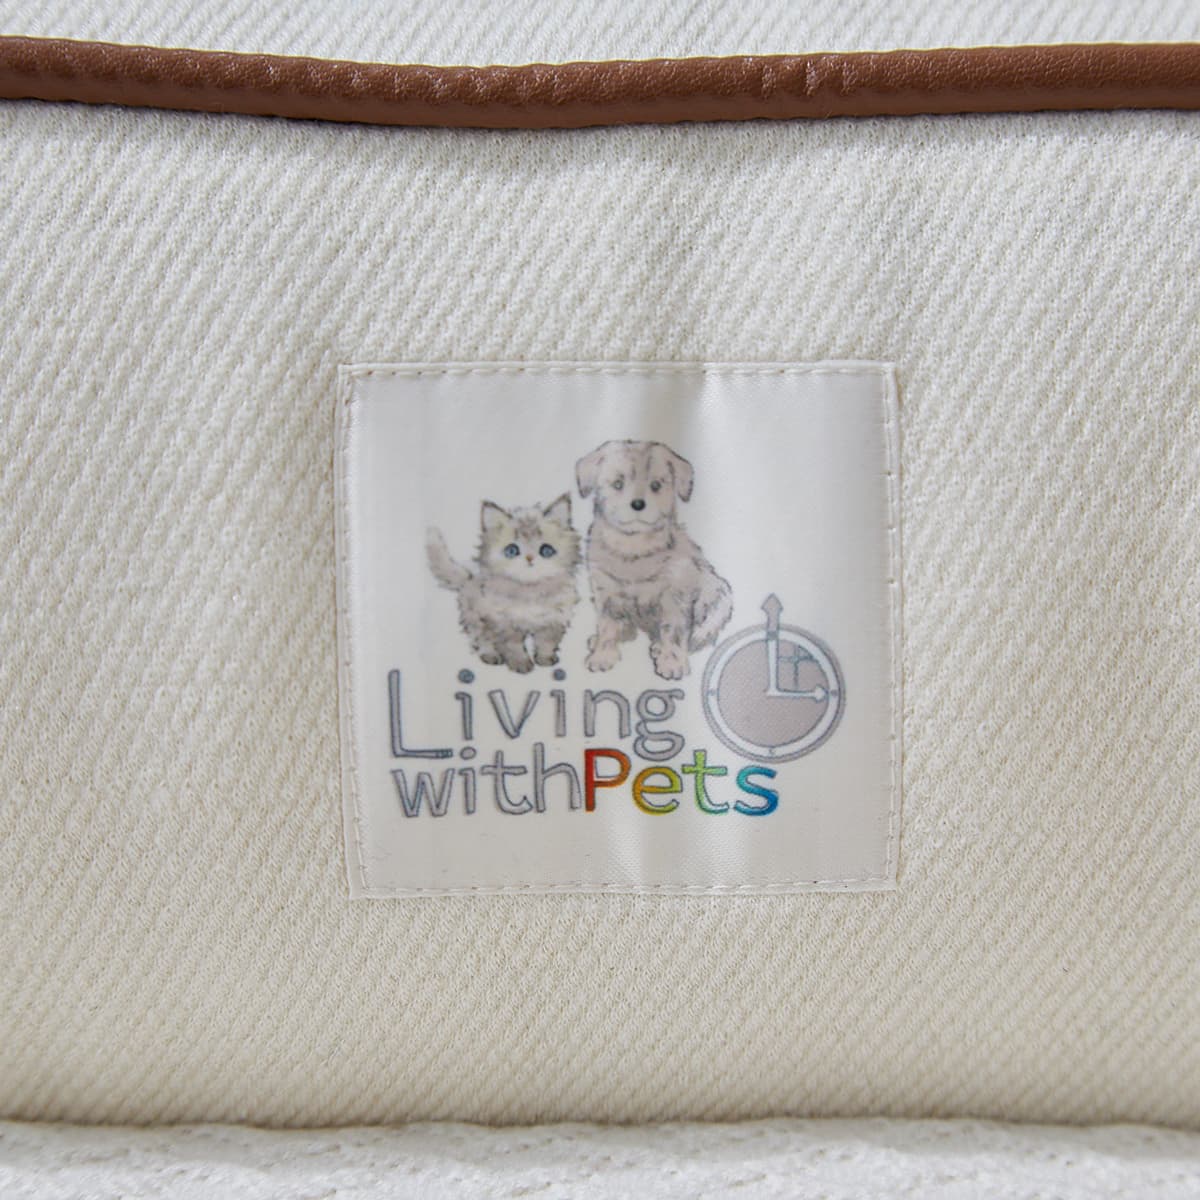 Living with Pets ロゴ入り